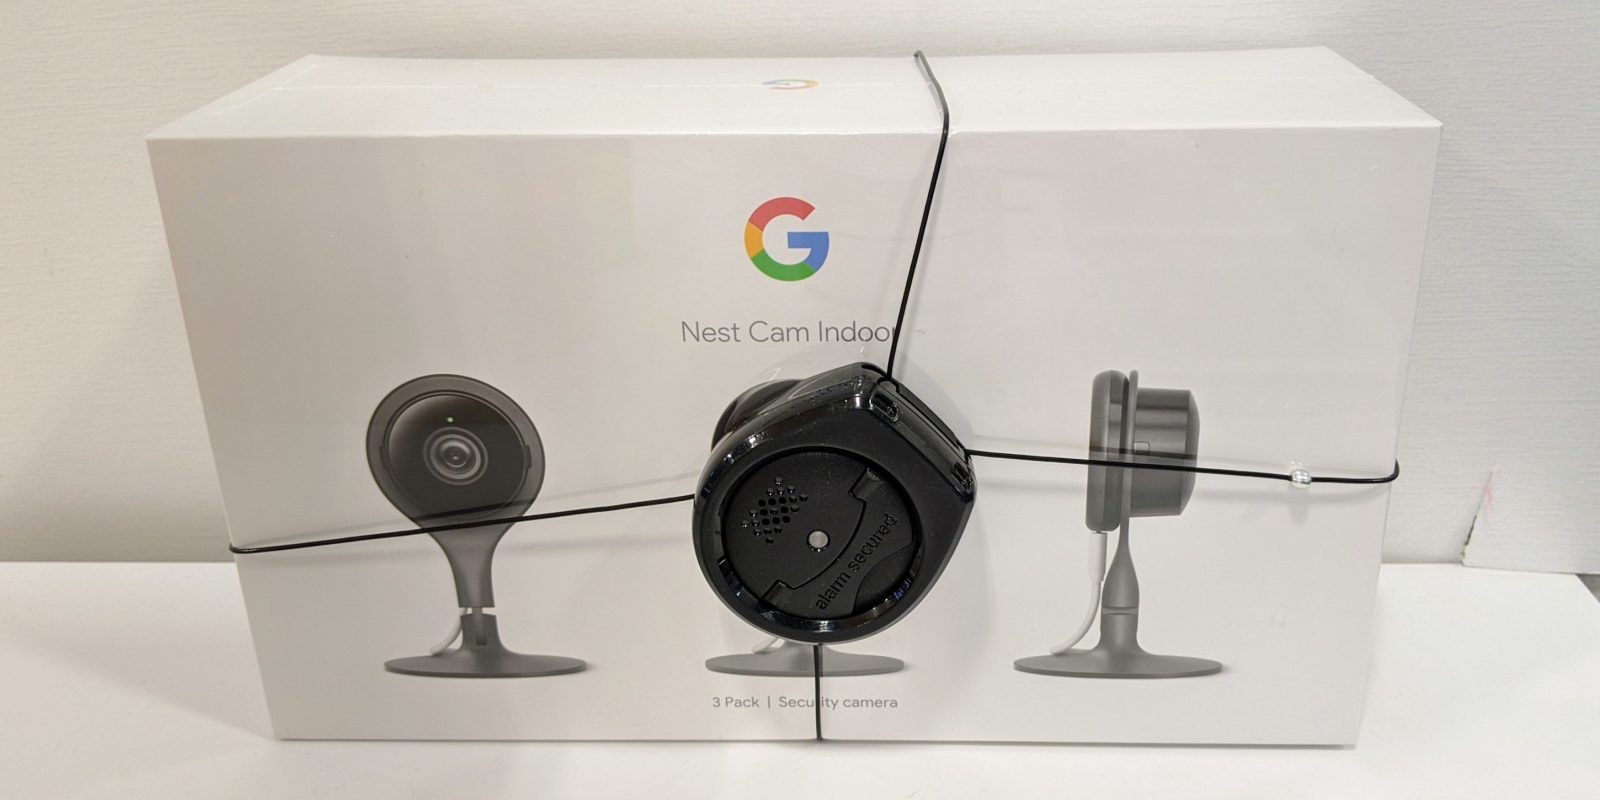 Existing Nest products get new Google Nest packaging Raymond Tec